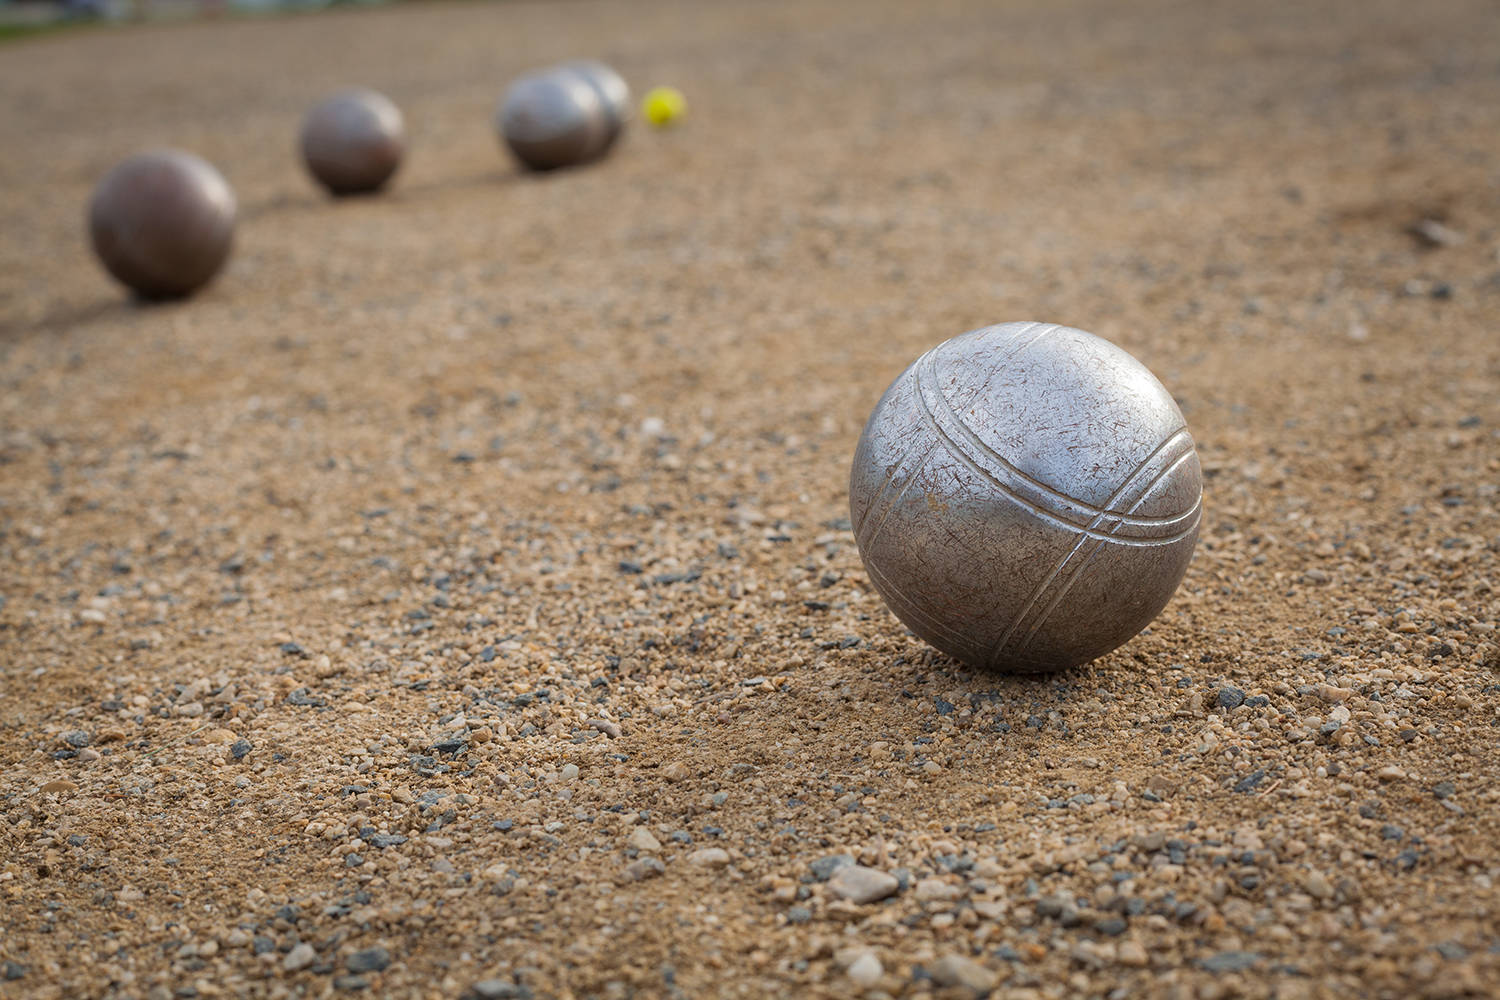 Petanque balls on a sandy pitch with other metal ball in the bac